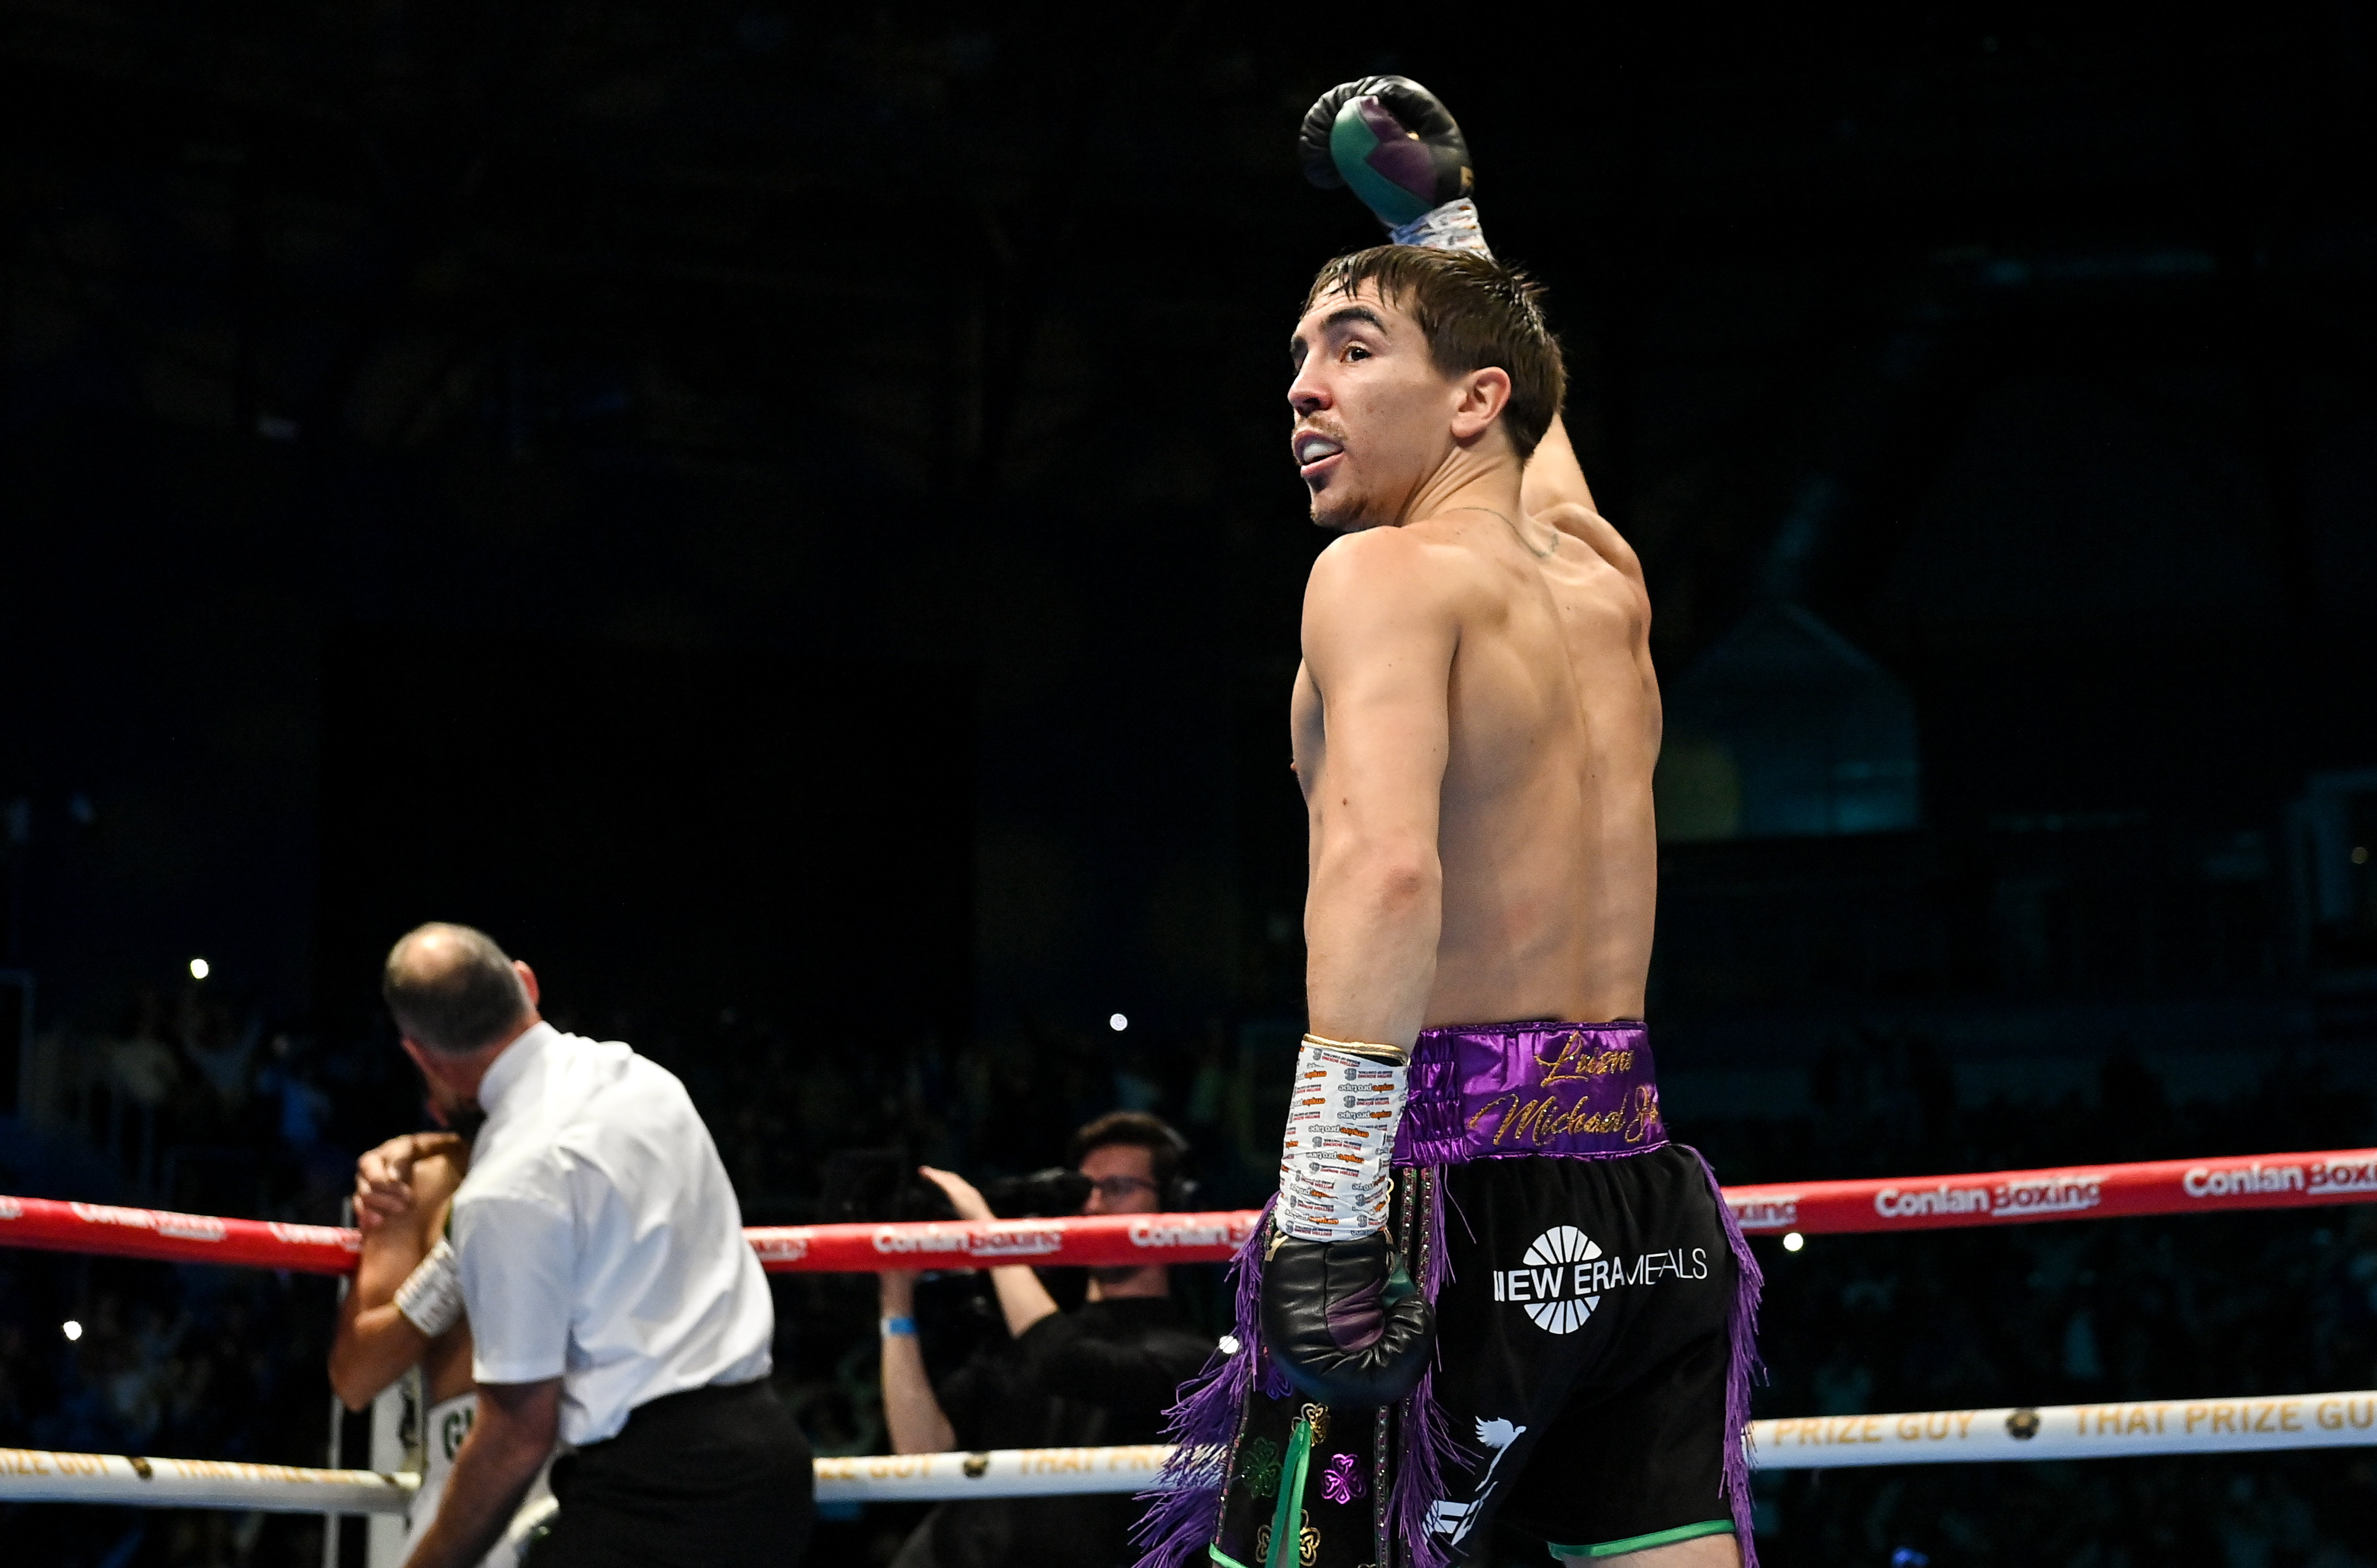 Michael Conlan says he’s learned to pace himself better over a 12 round fight.